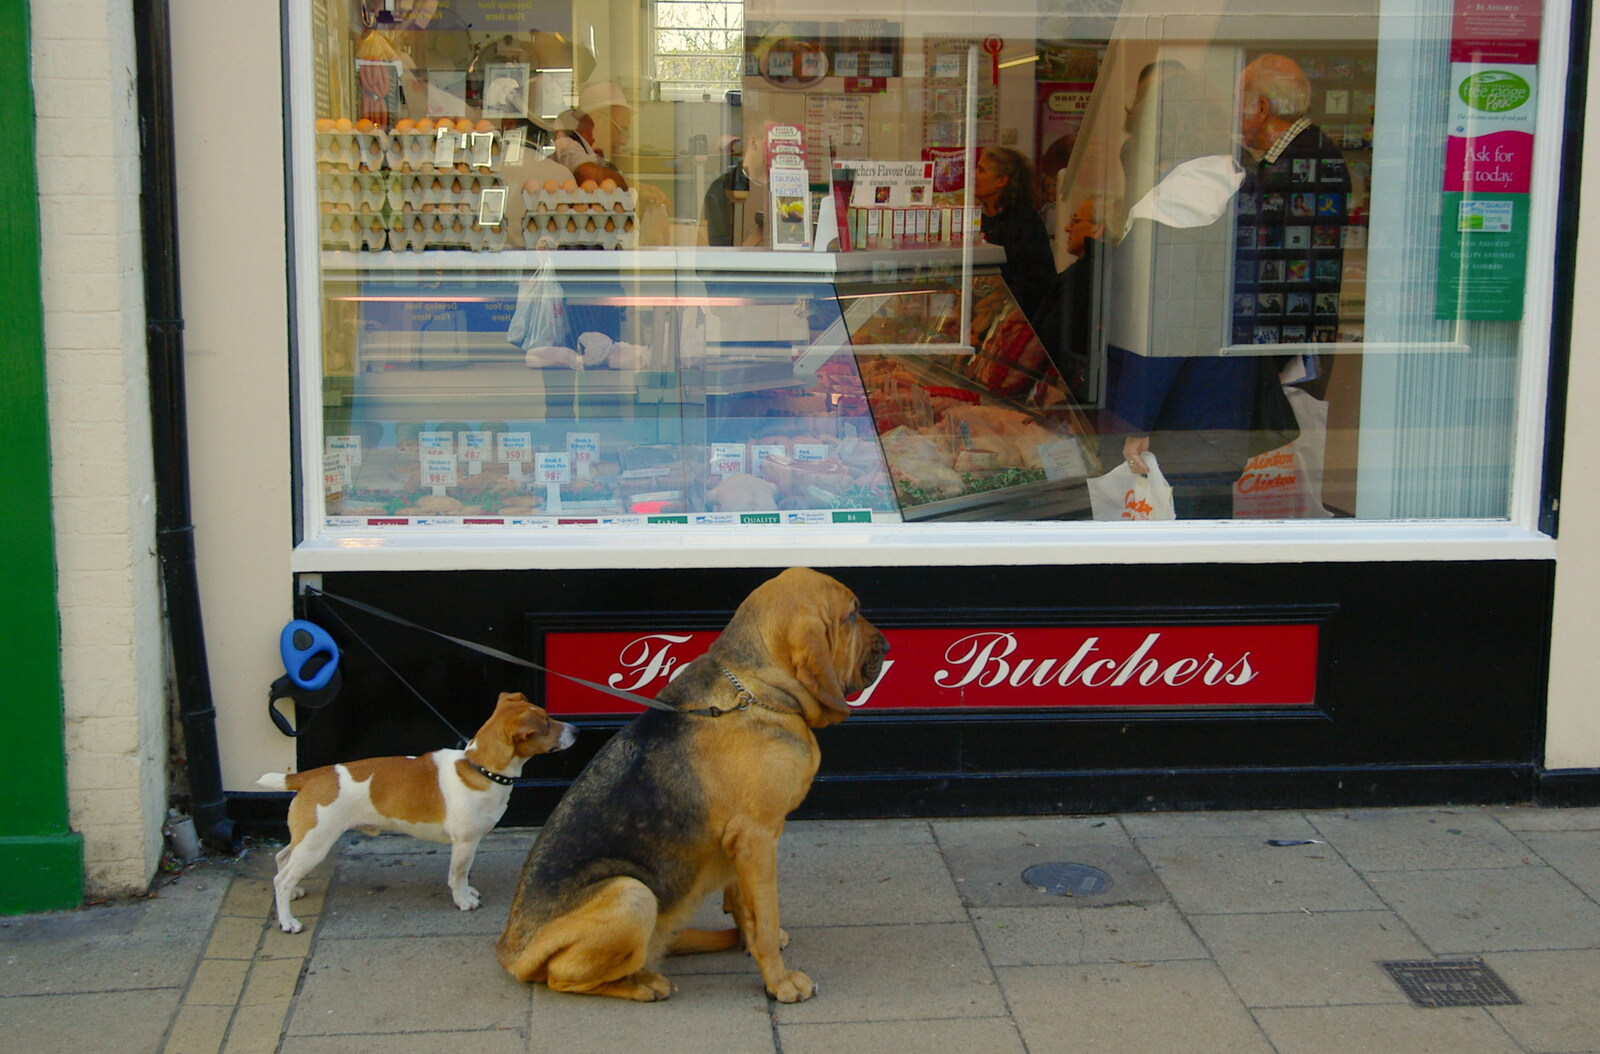 Fit as a butcher's dogs, outside Cannell's from Burnt-out Recycling Bins and Fireworks from a Distance, Diss, Norfolk - 4th November 2005